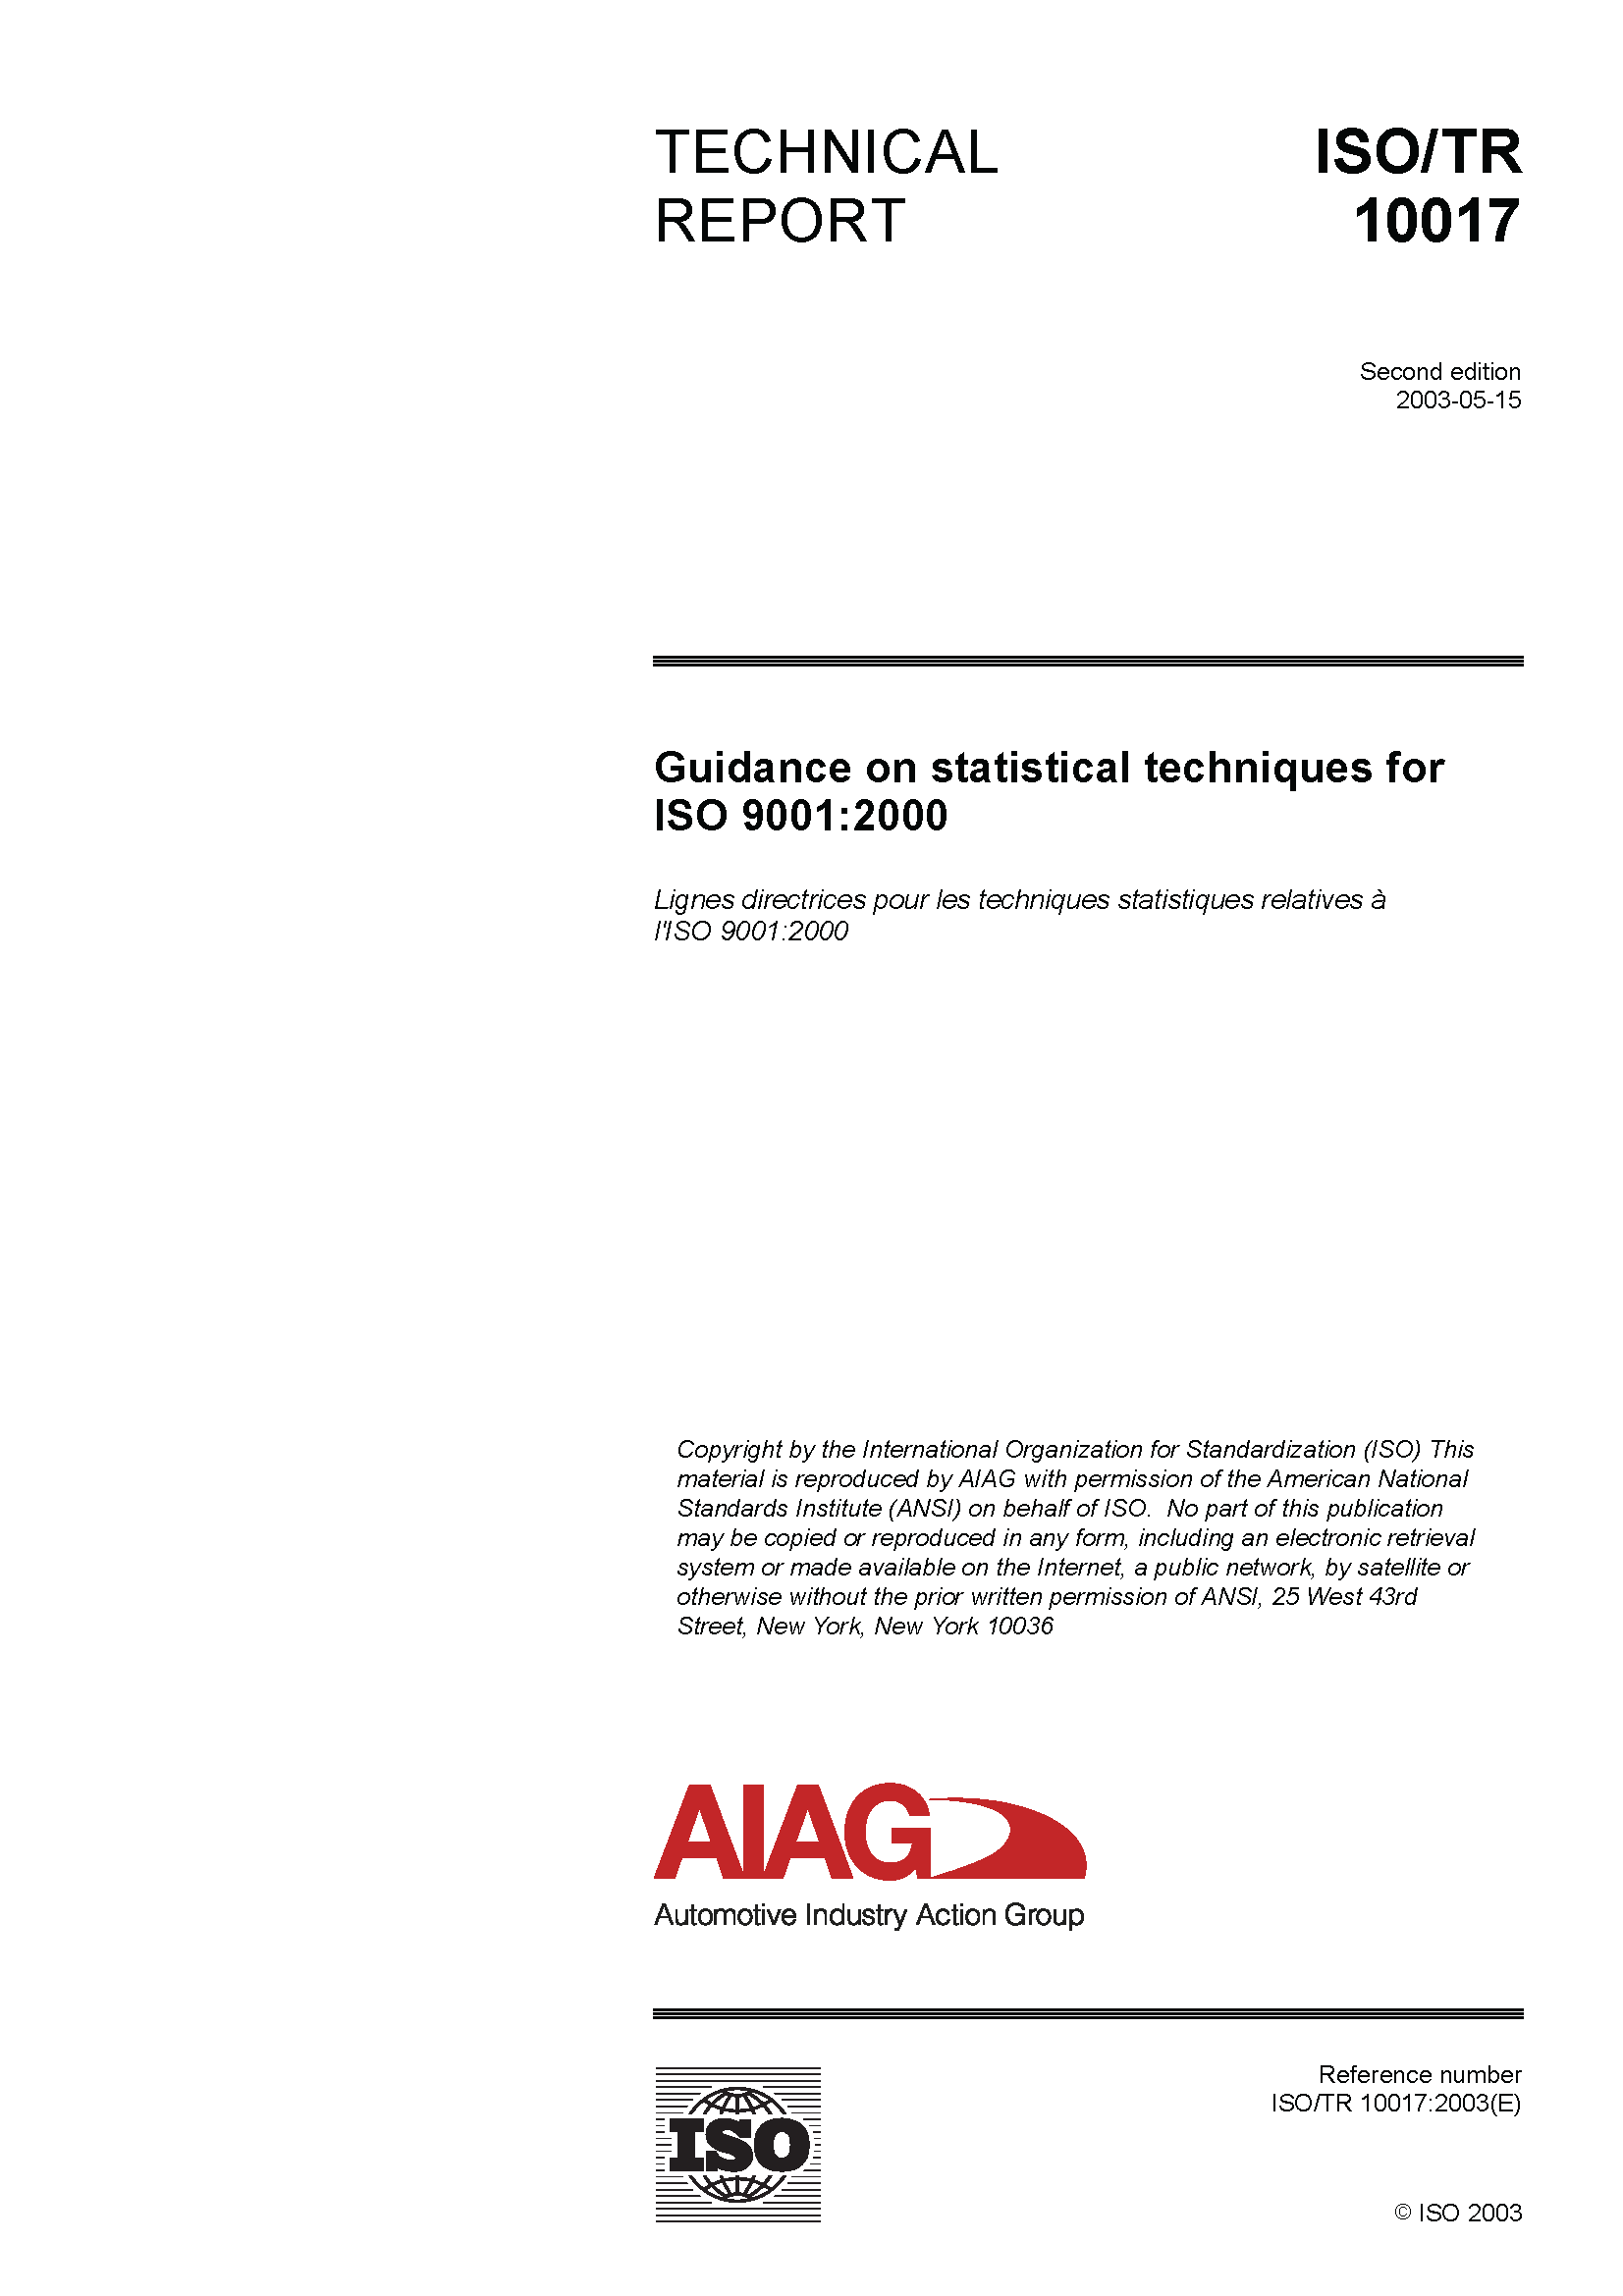 Publications AIAG Guidance on Statistical Techniques for ISO 9001:2000 1.5.2003 preview